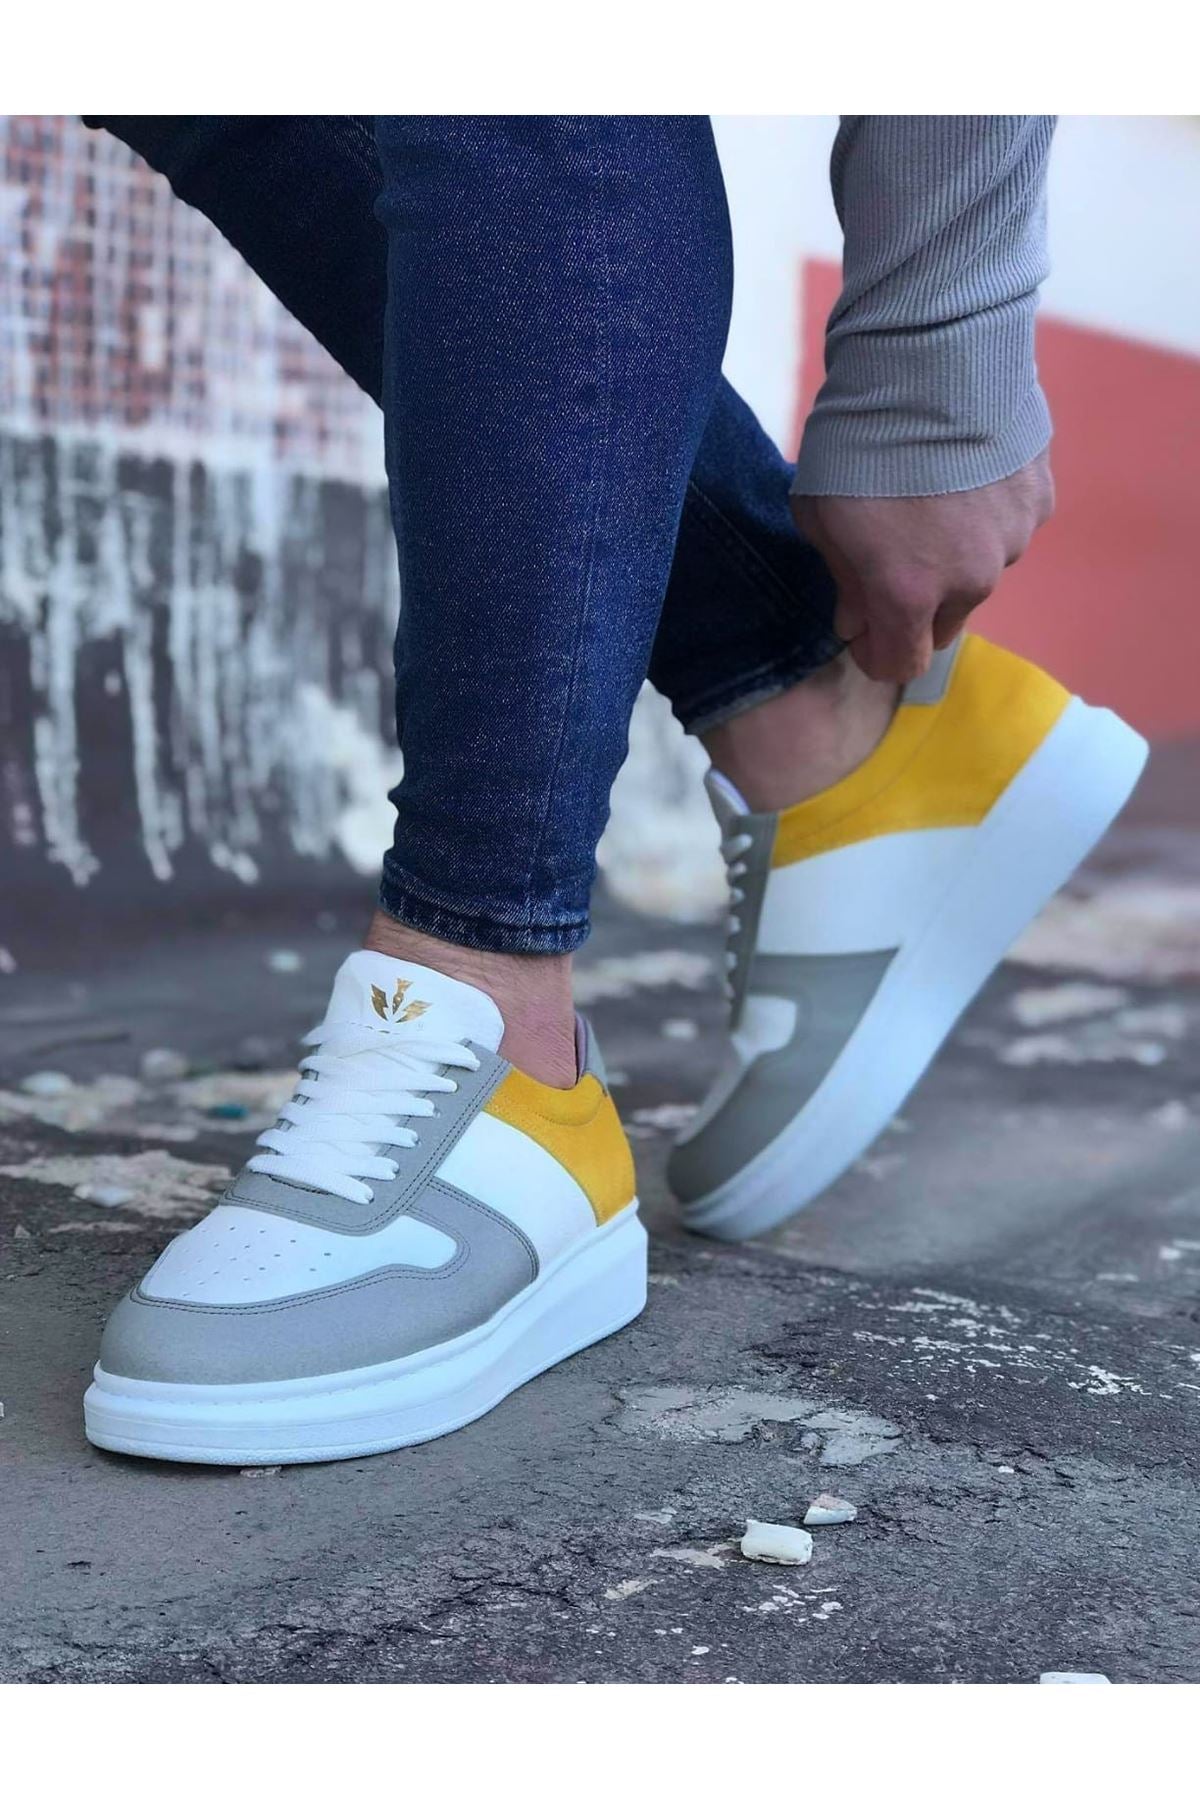 WG011 White Yellow Men's Casual Shoes - STREETMODE™